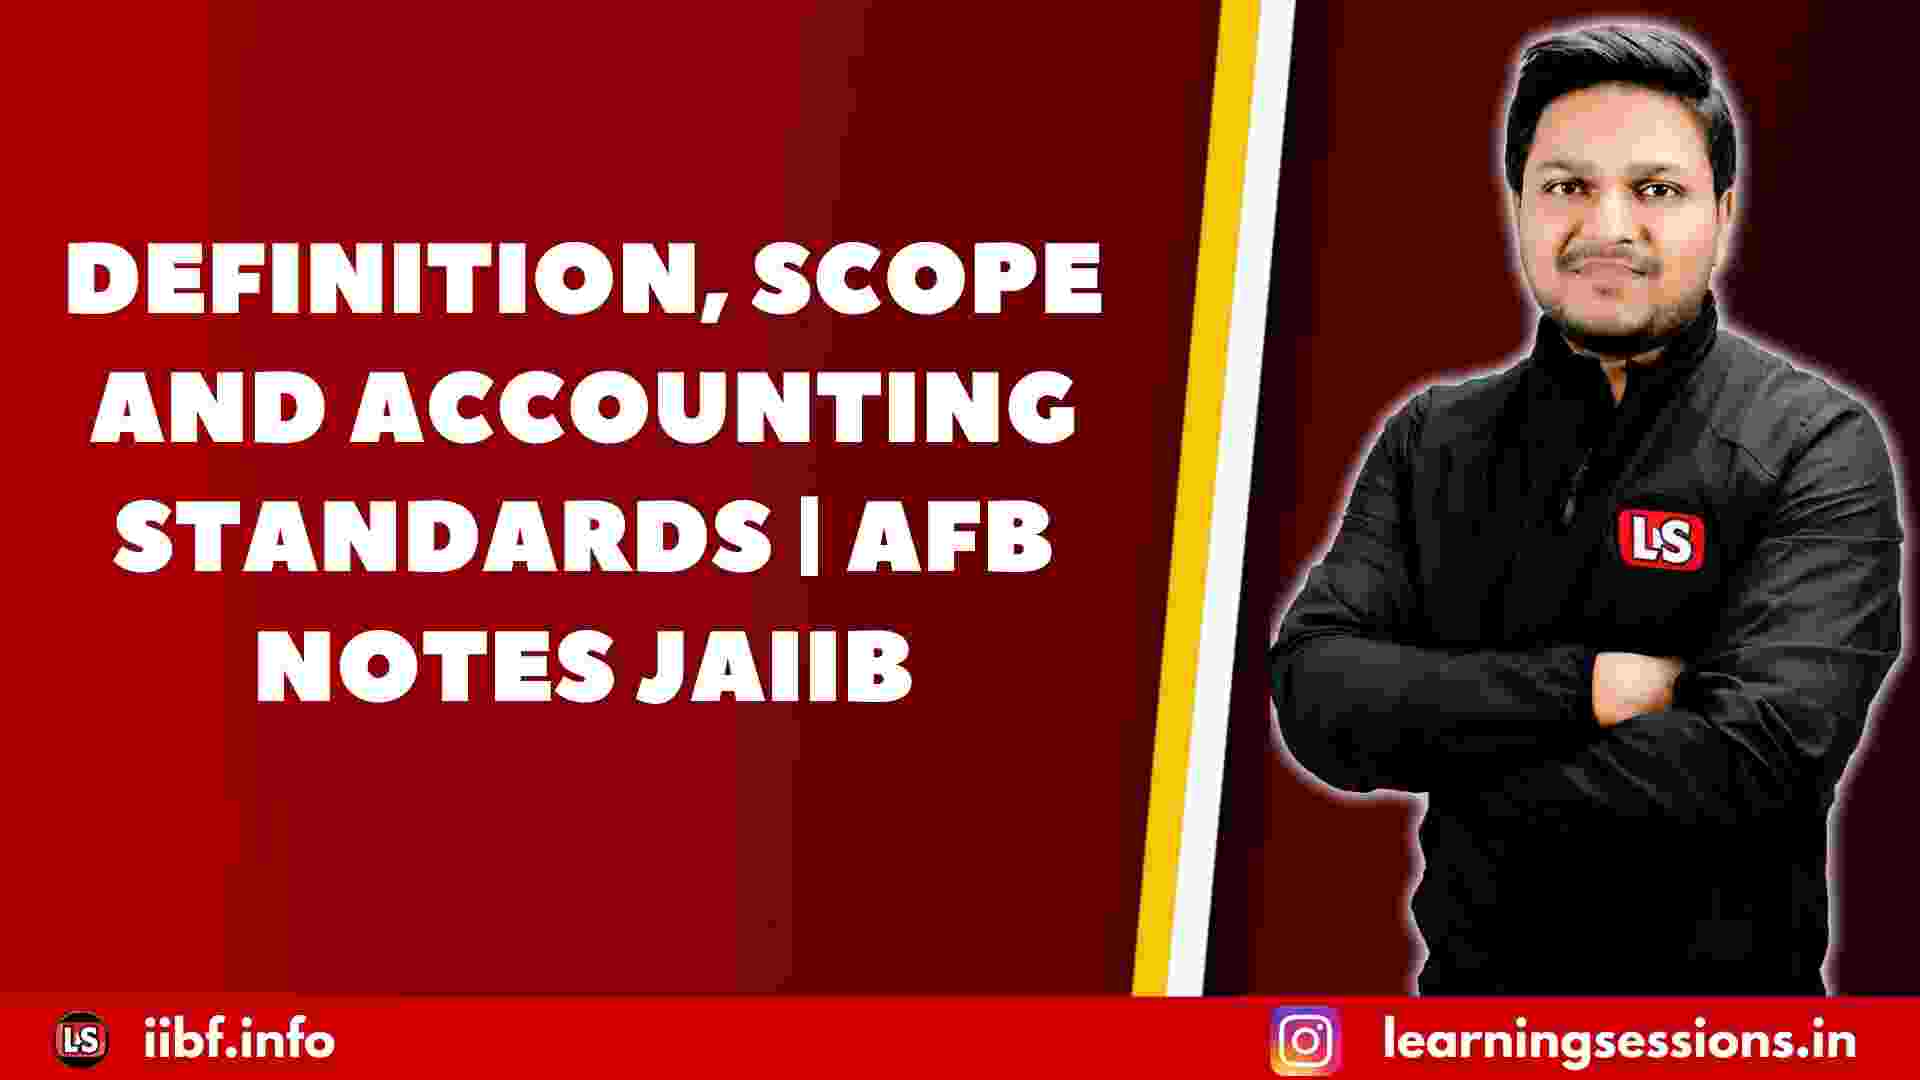 DEFINITION, SCOPE AND ACCOUNTING STANDARDS | AFB NOTES JAIIB